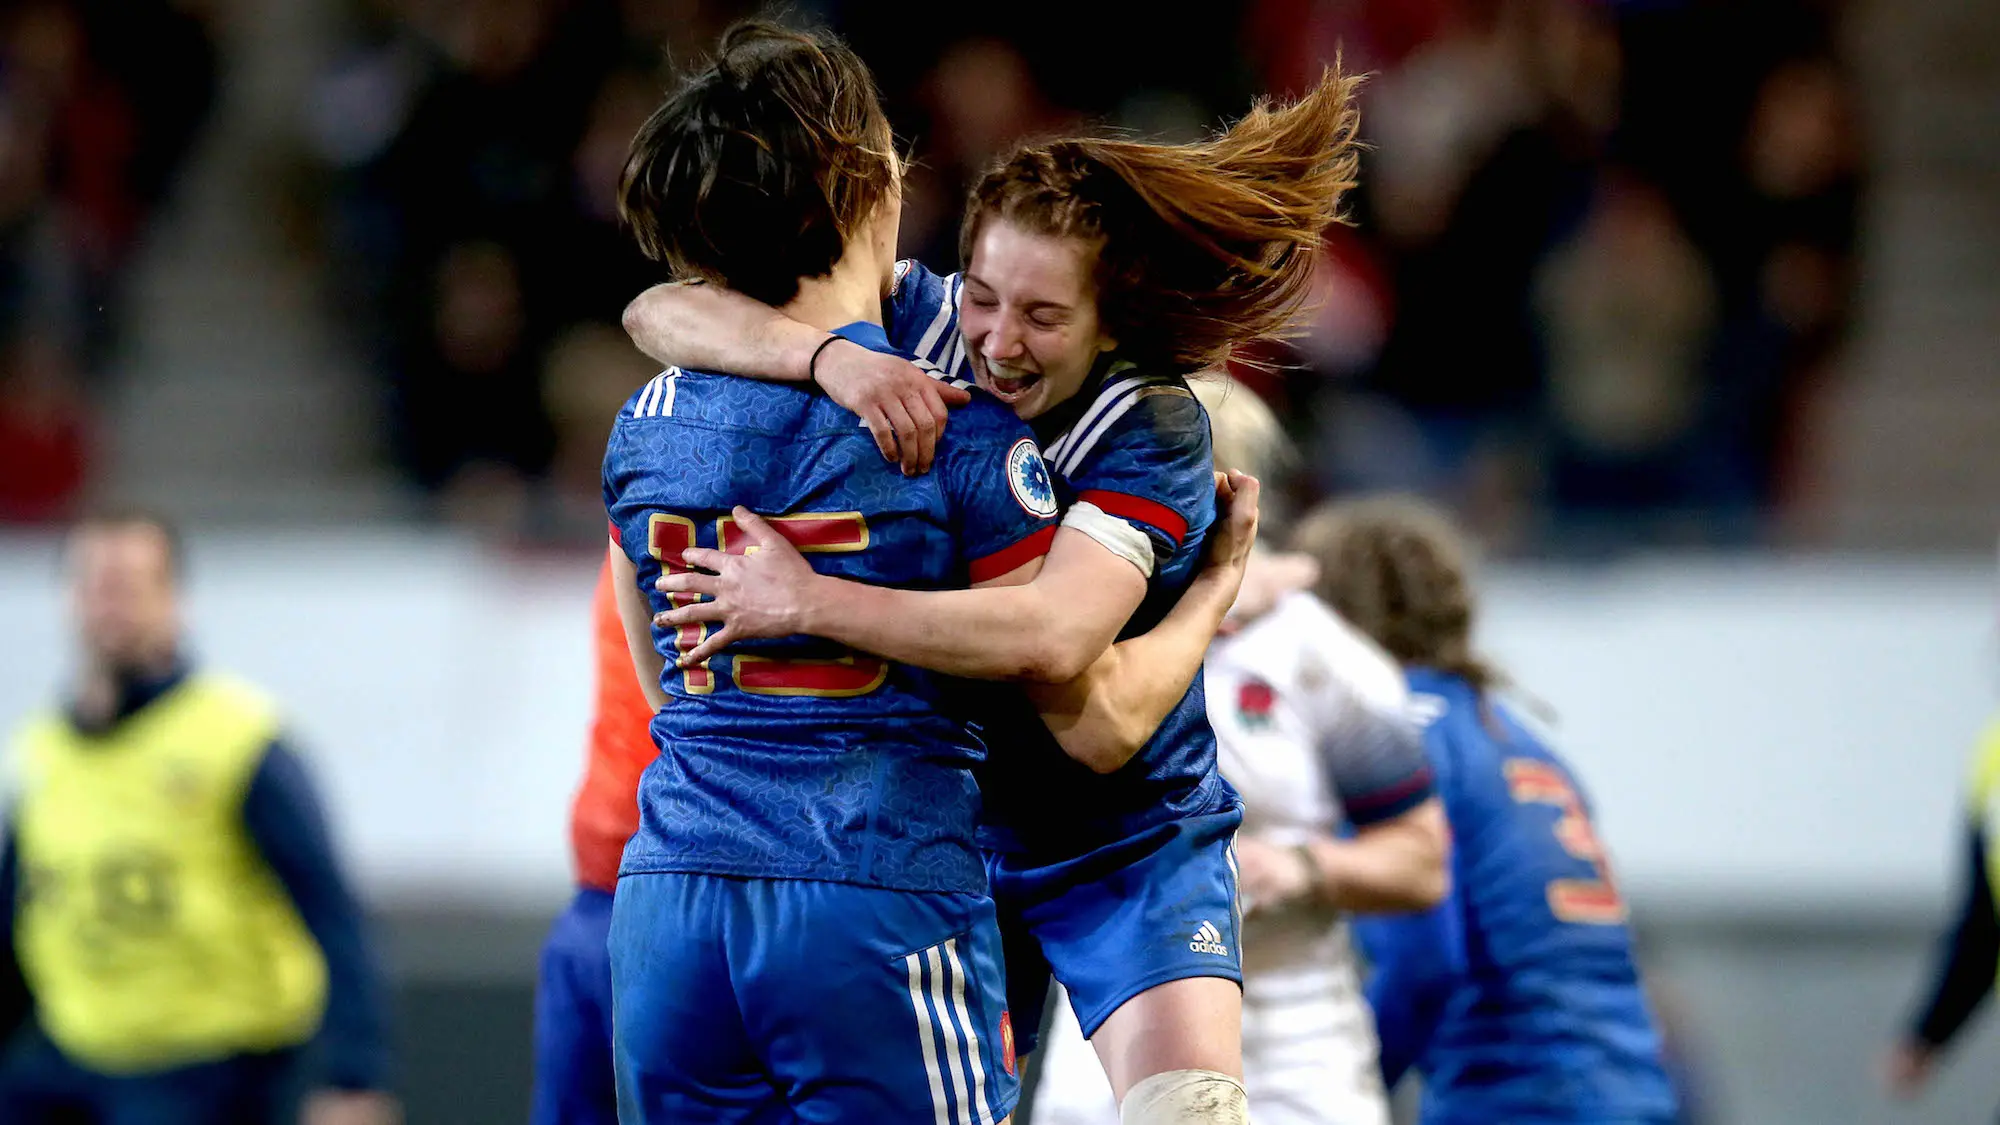 Jessy Tremouliere and Pauline Bourdon celebrate at the final whistle 10/3/2018